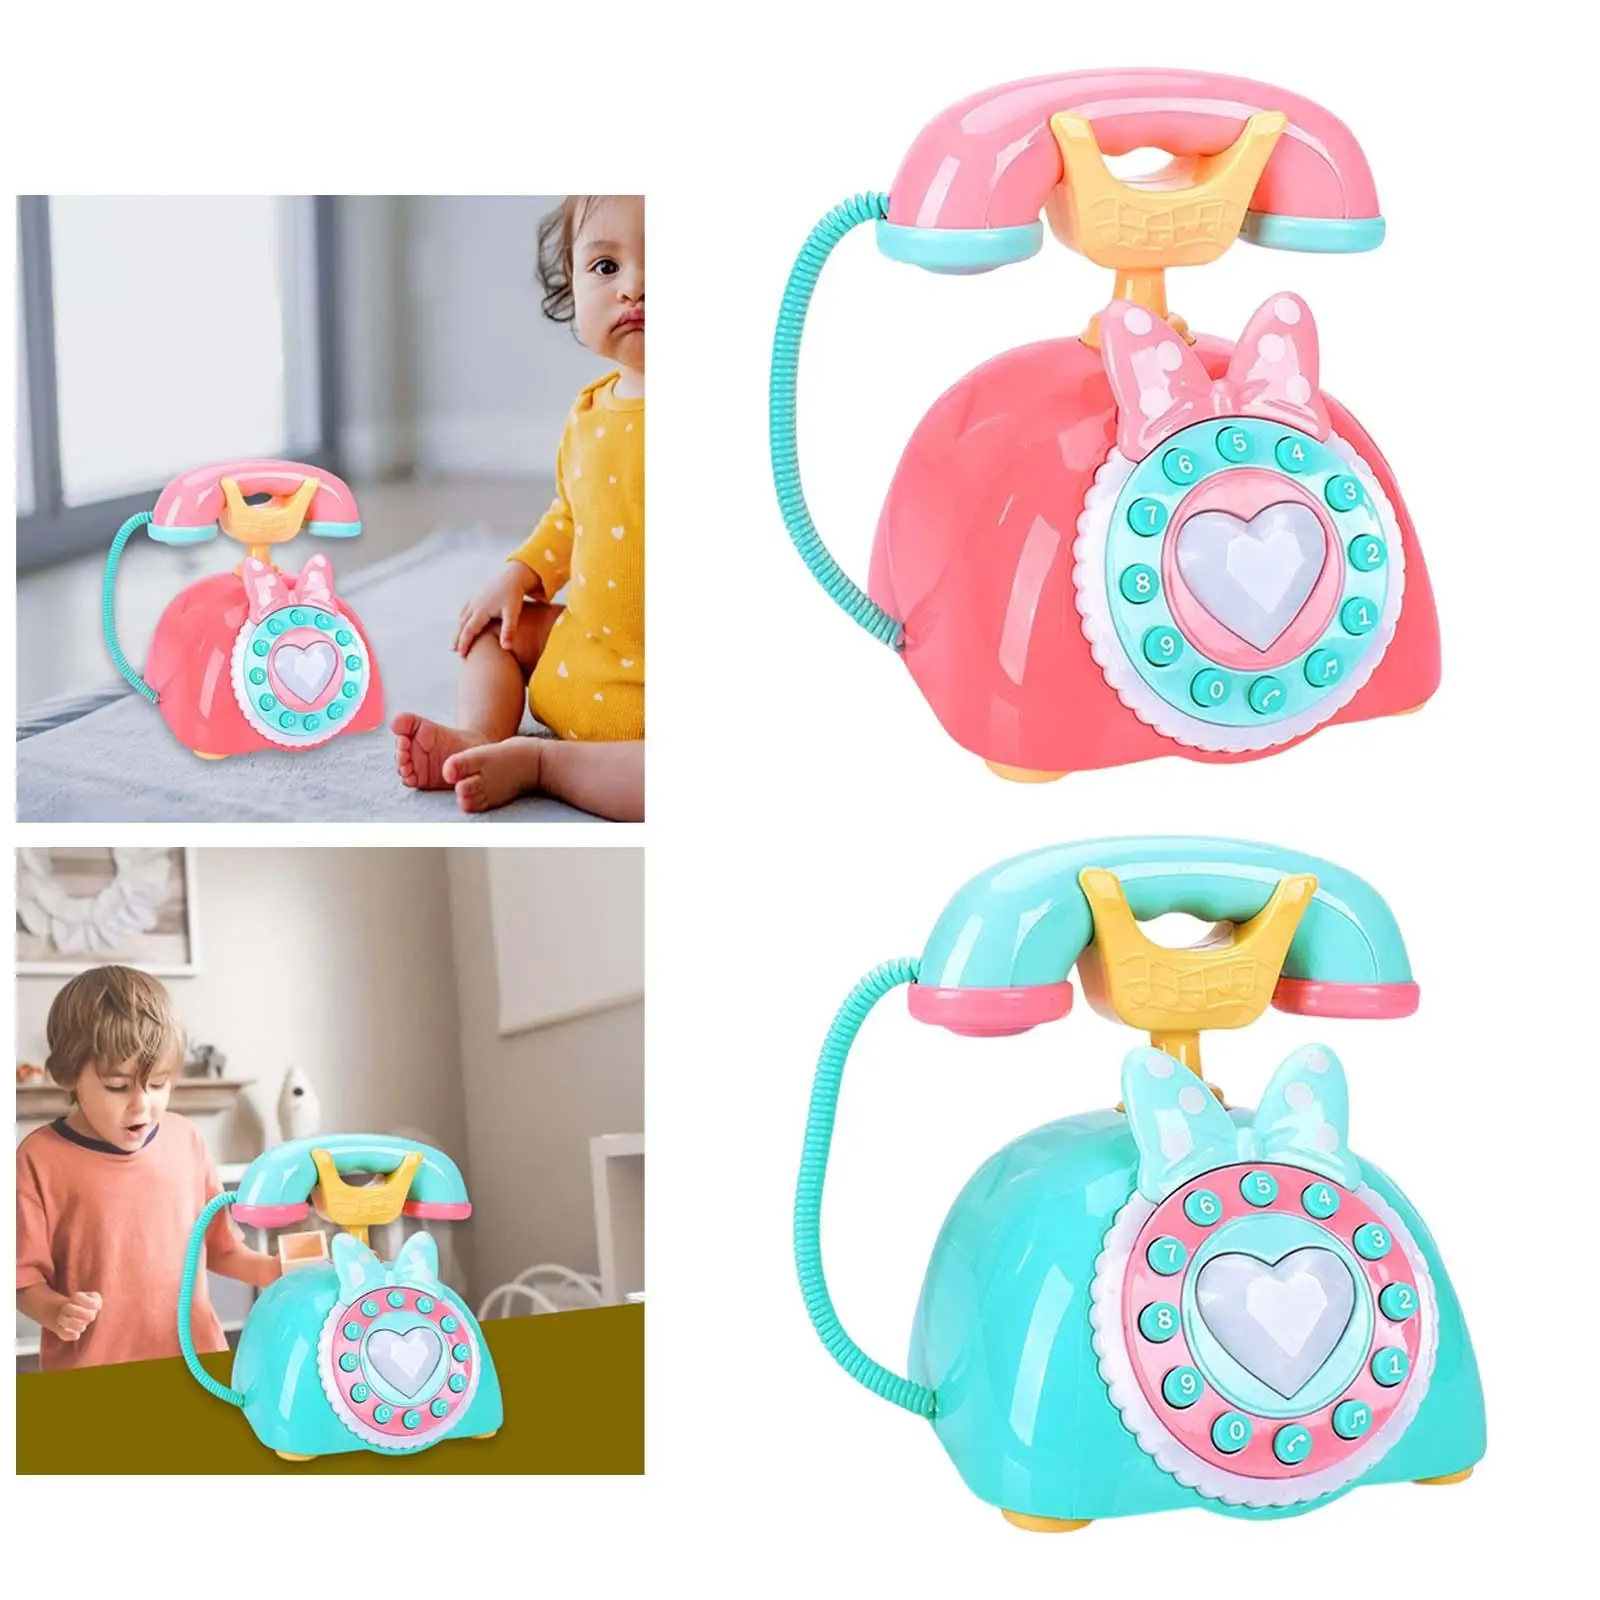 Telephone Toy Develop Chinese English Bilingual for Pretend Play Children 3+